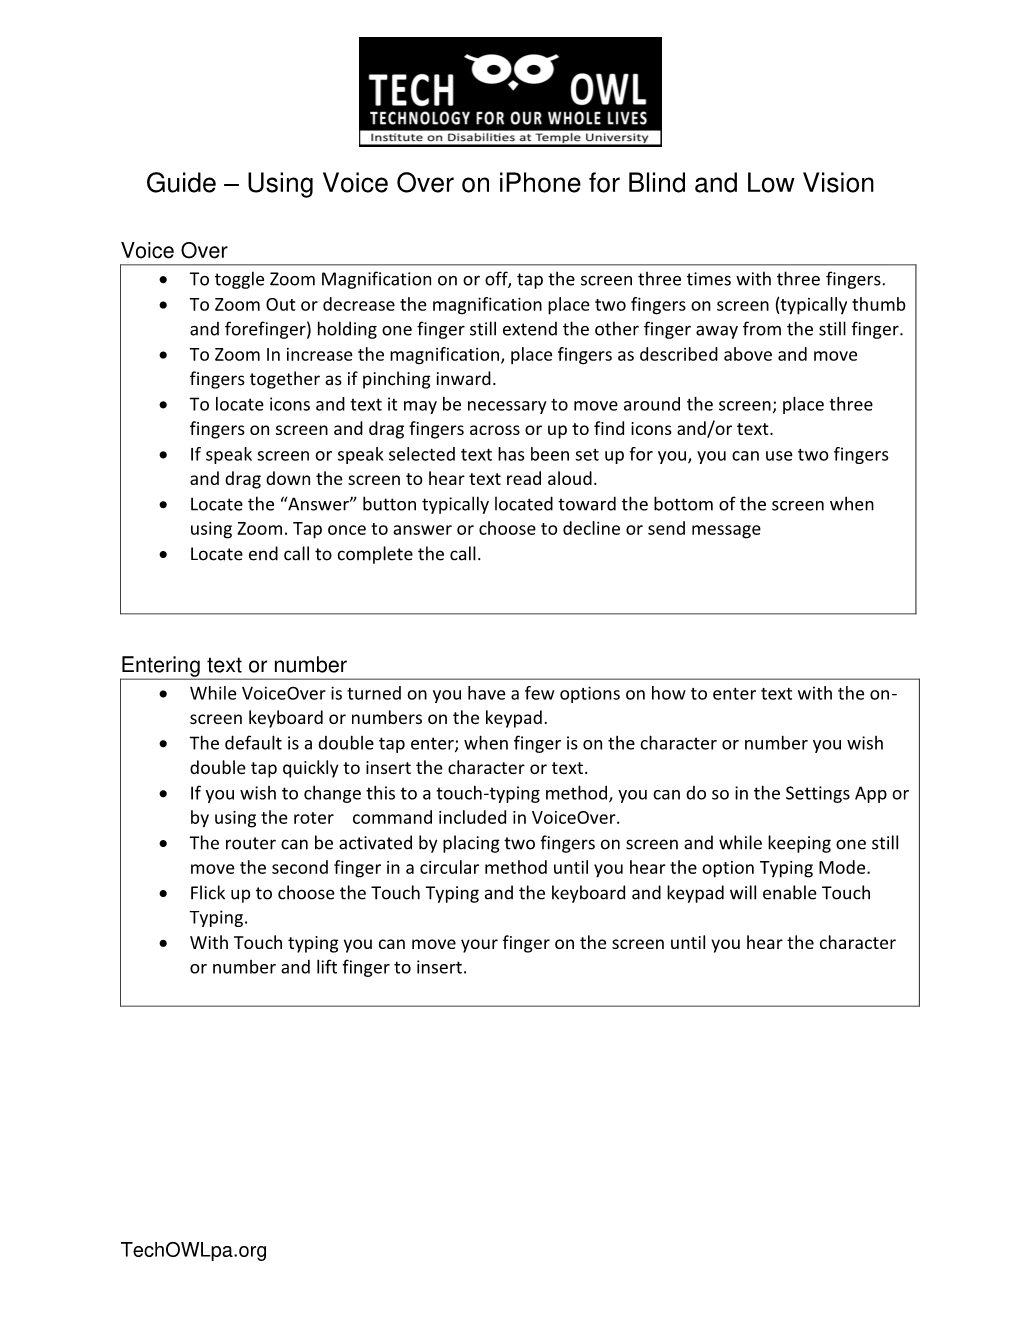 Using Voice Over on Iphone for Blind and Low Vision